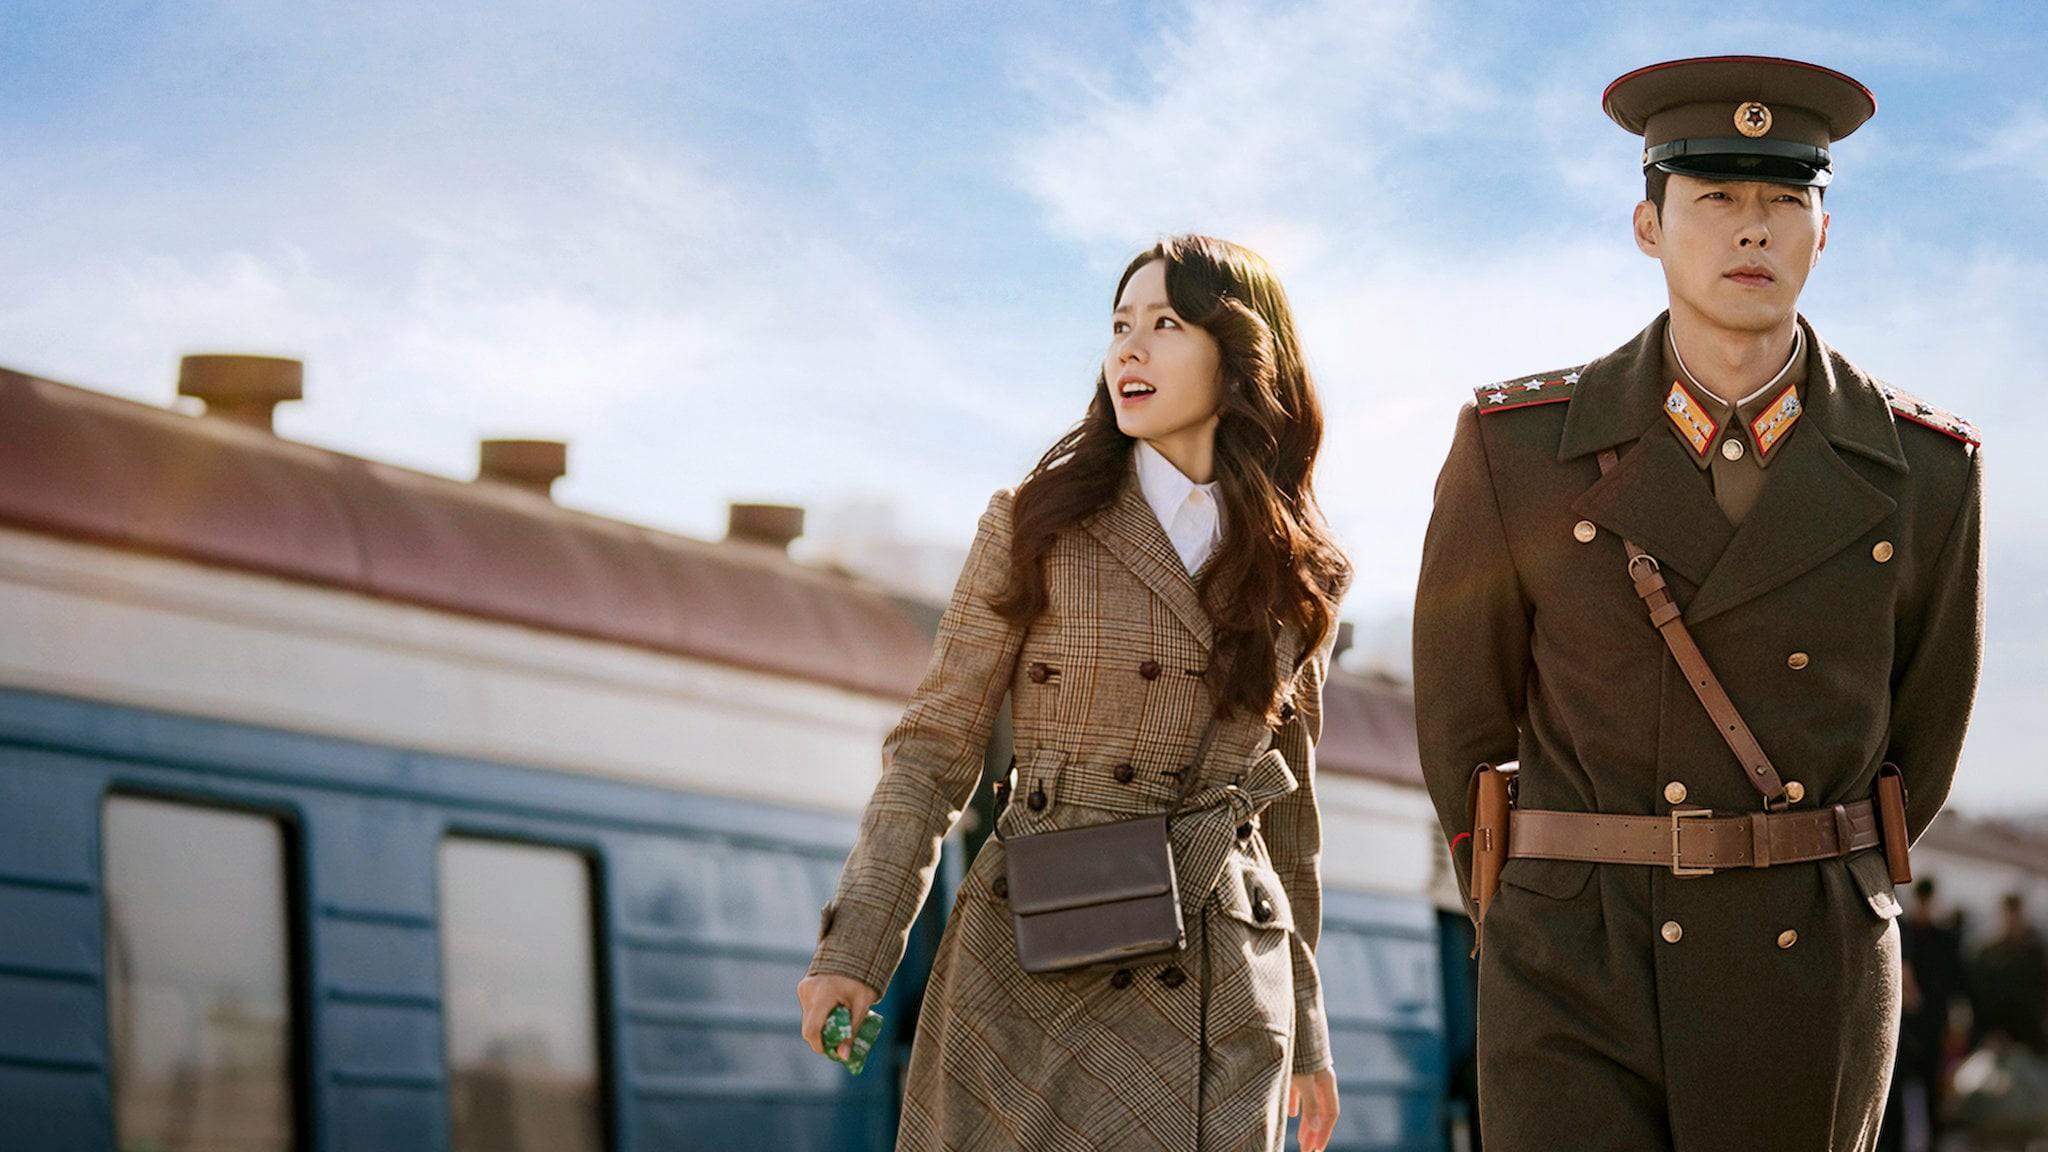 Main characters in military attire standing by a train for drama poster.